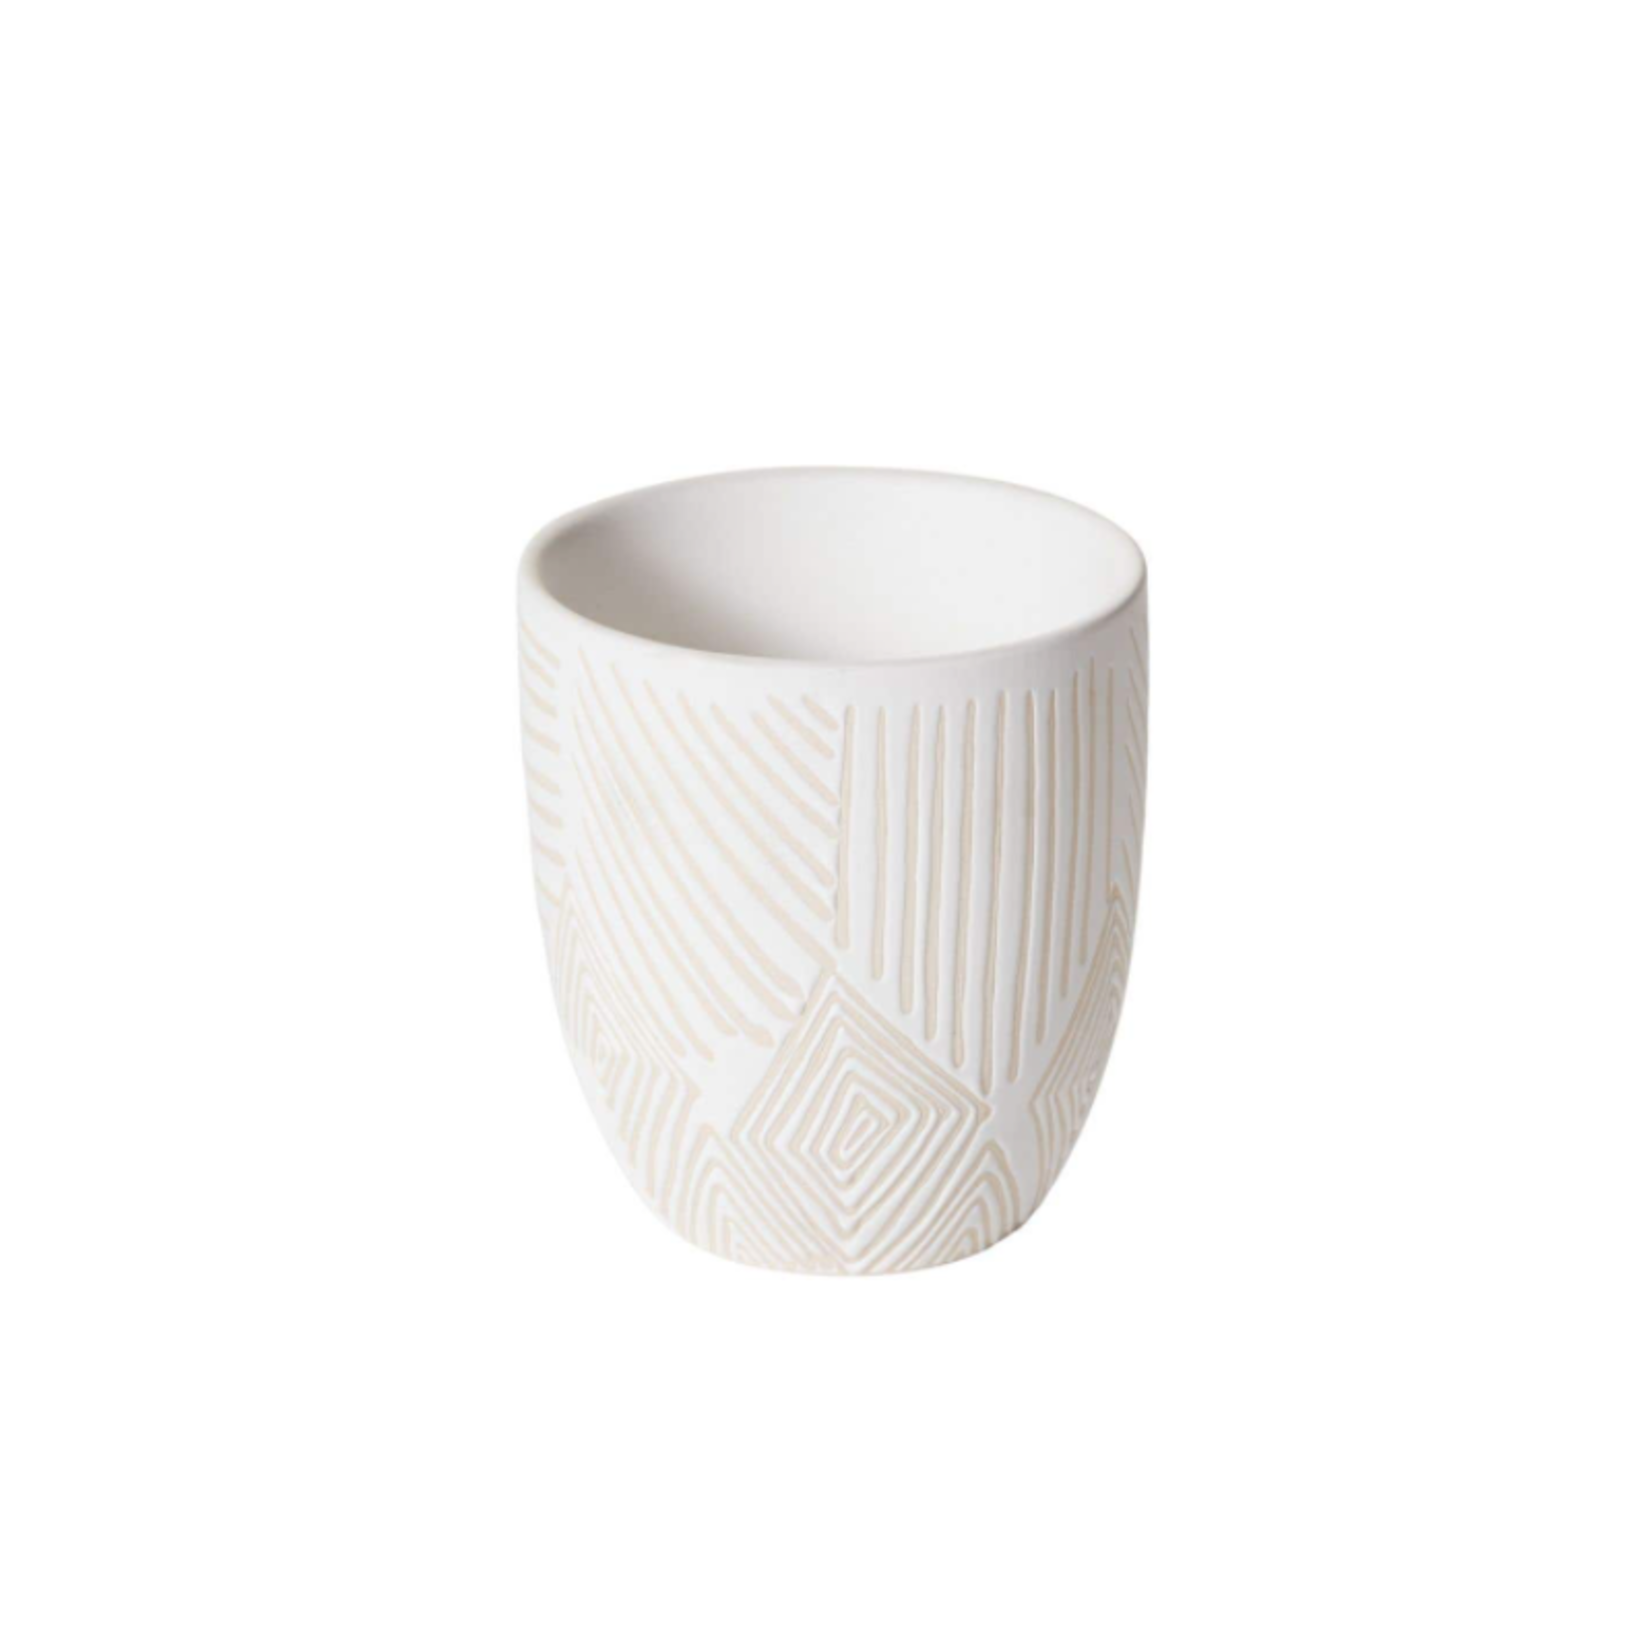 40% off was $10 now $6. 4.25”H X 4.5” WHITE CERAMIC PFIEFER POT